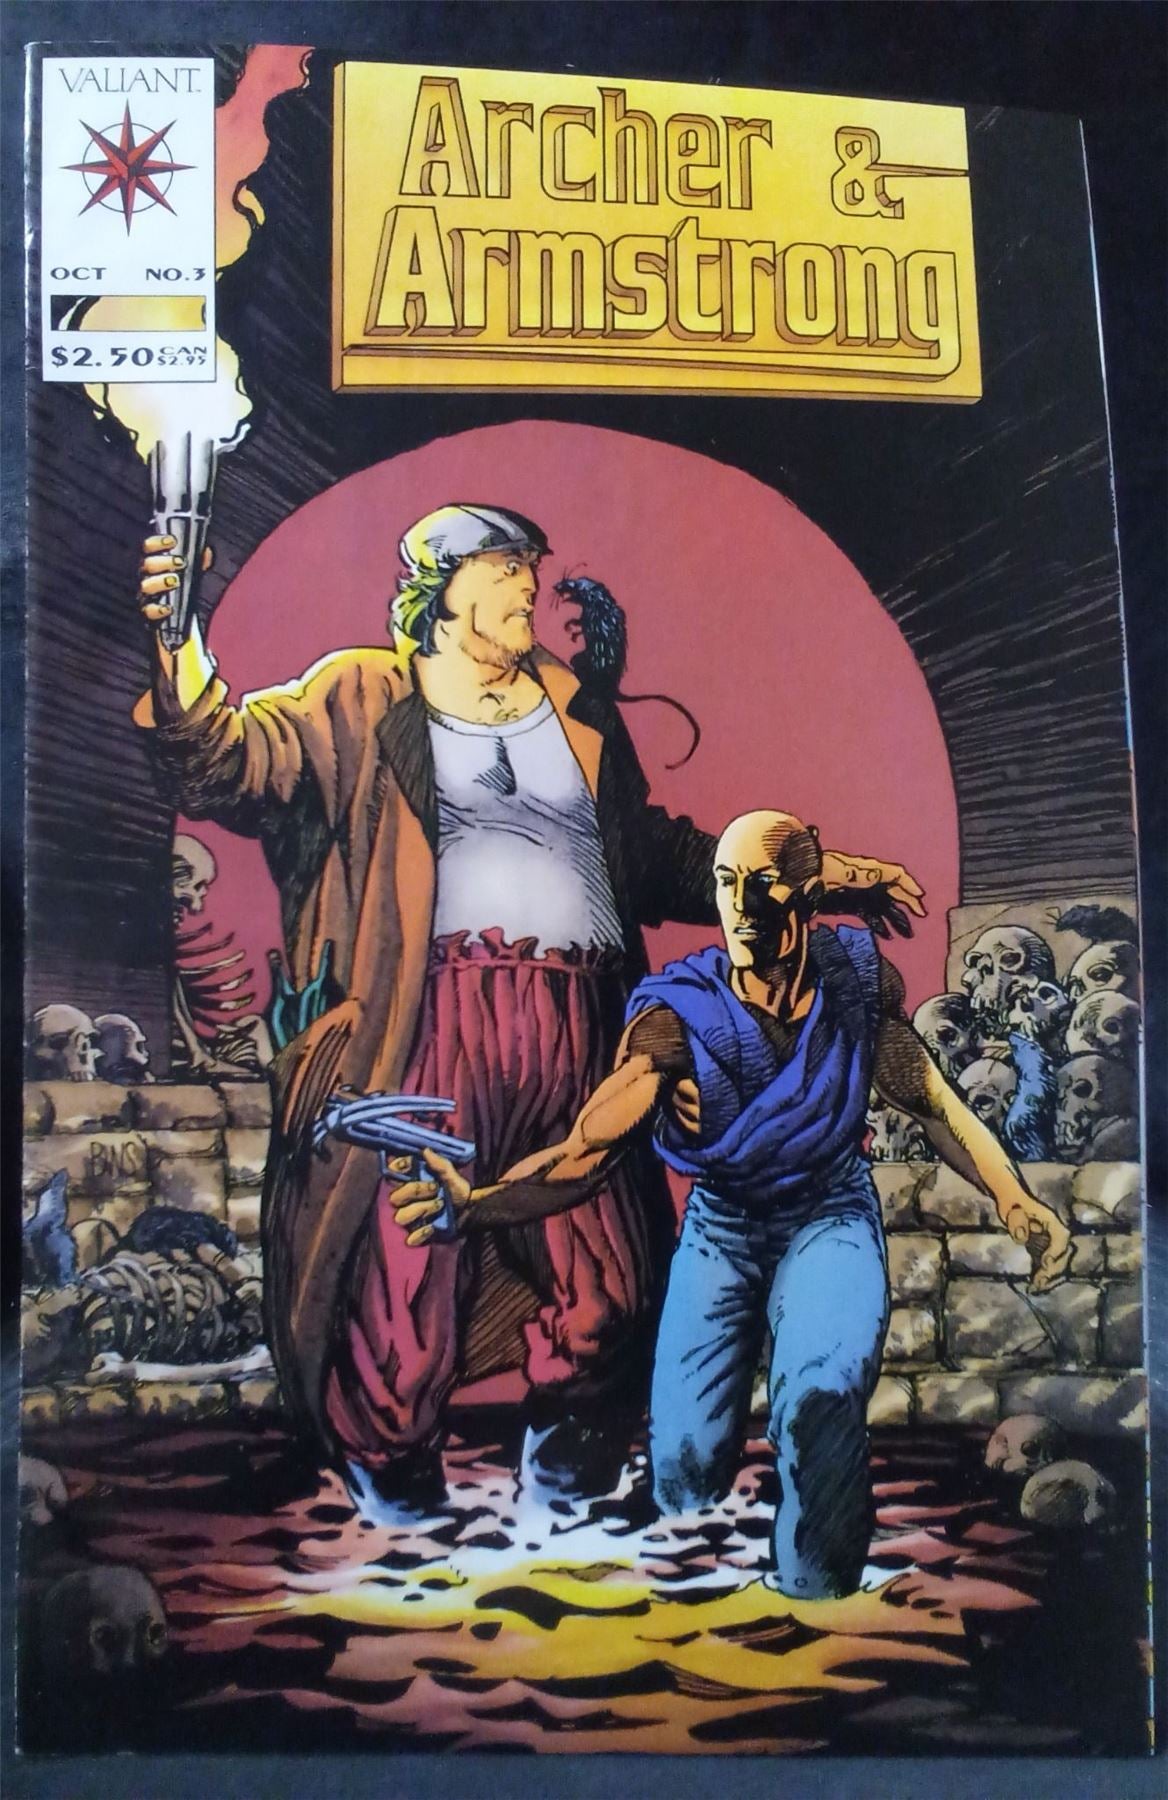 Archer & Armstrong #3 1992 valiant Comic Book